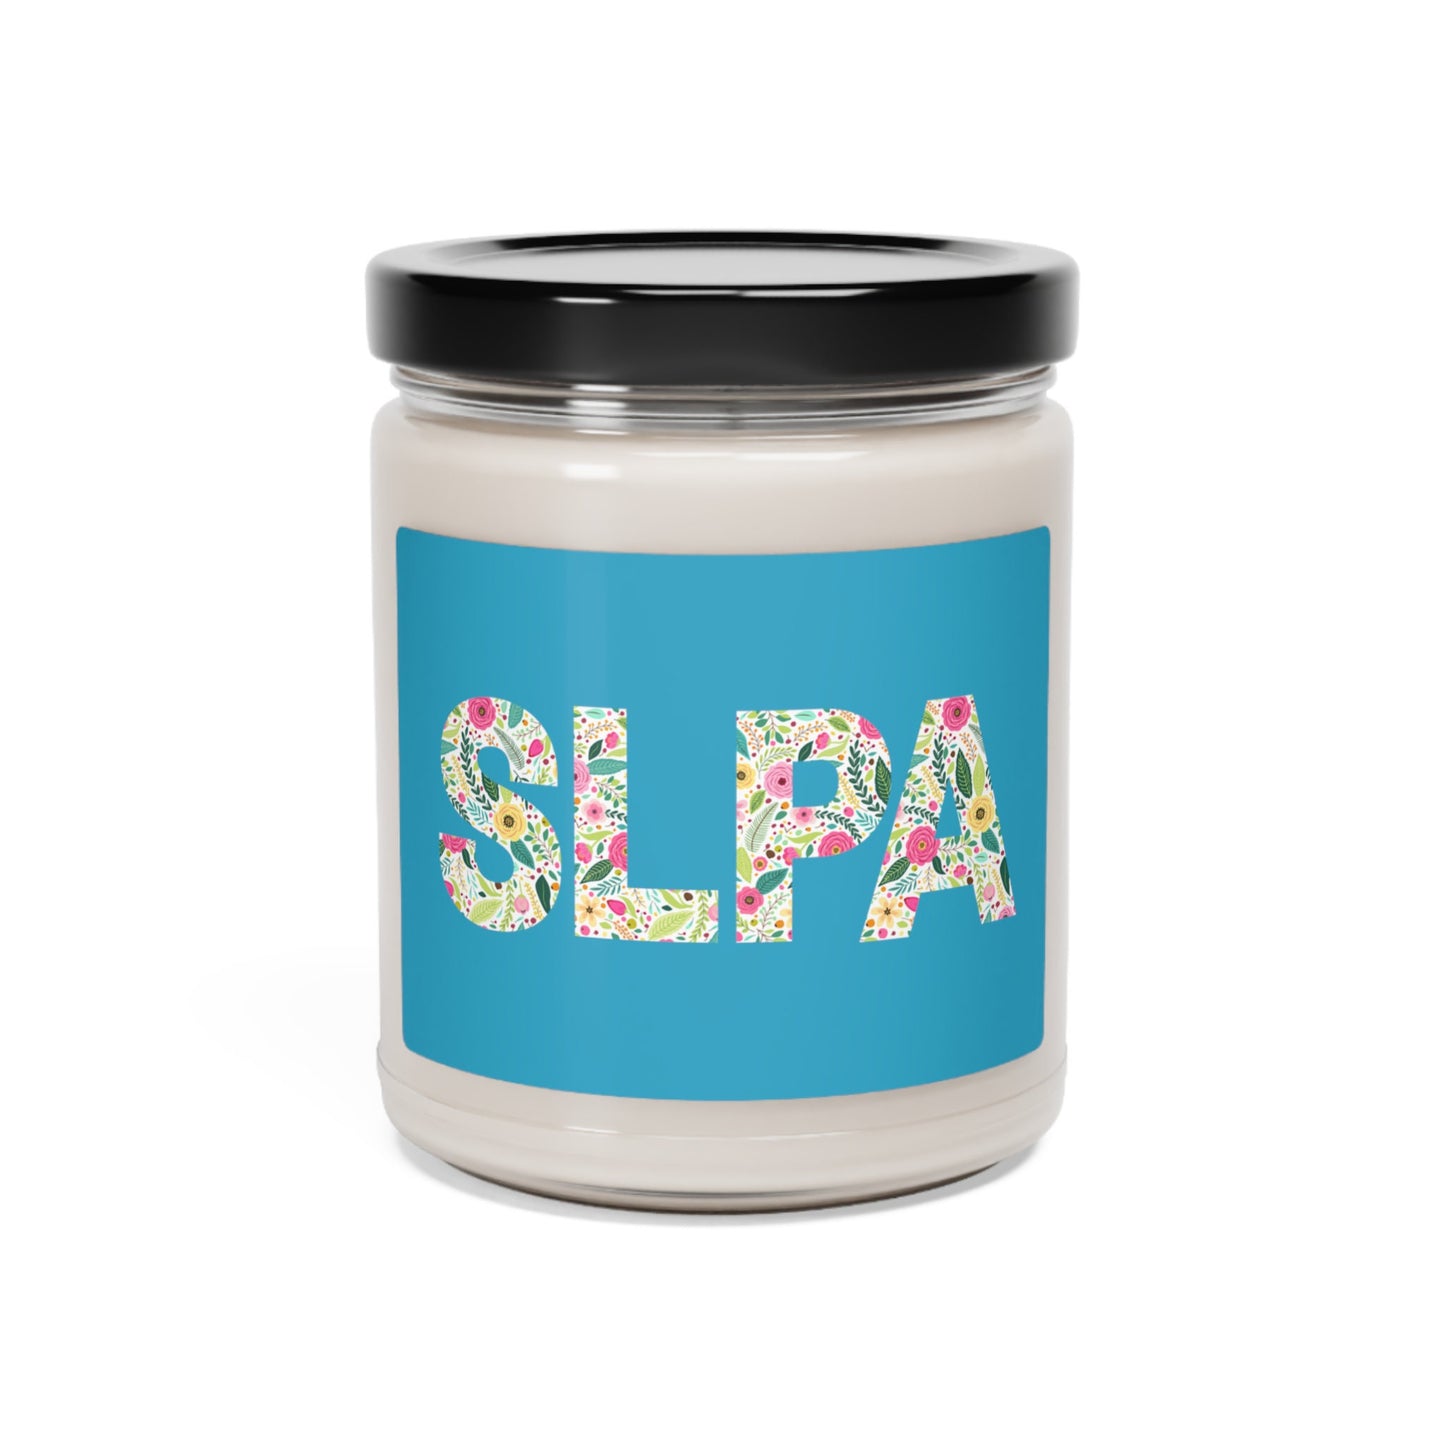 SLPA Scented Soy Candle, 9oz